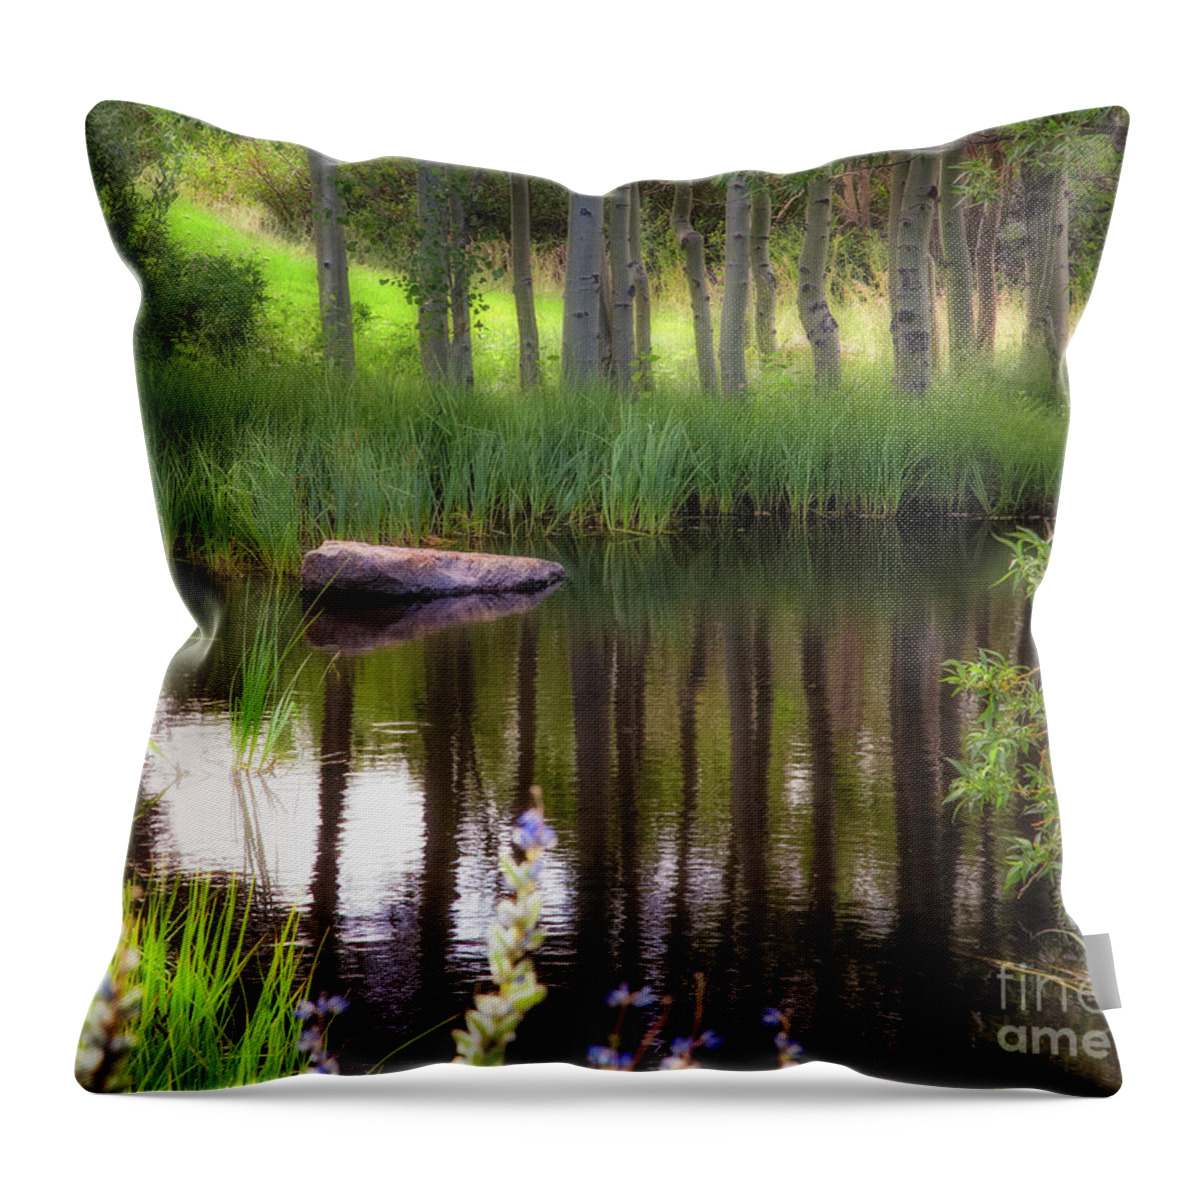 Meadow Throw Pillow featuring the photograph Meadow Pond by Anthony Michael Bonafede